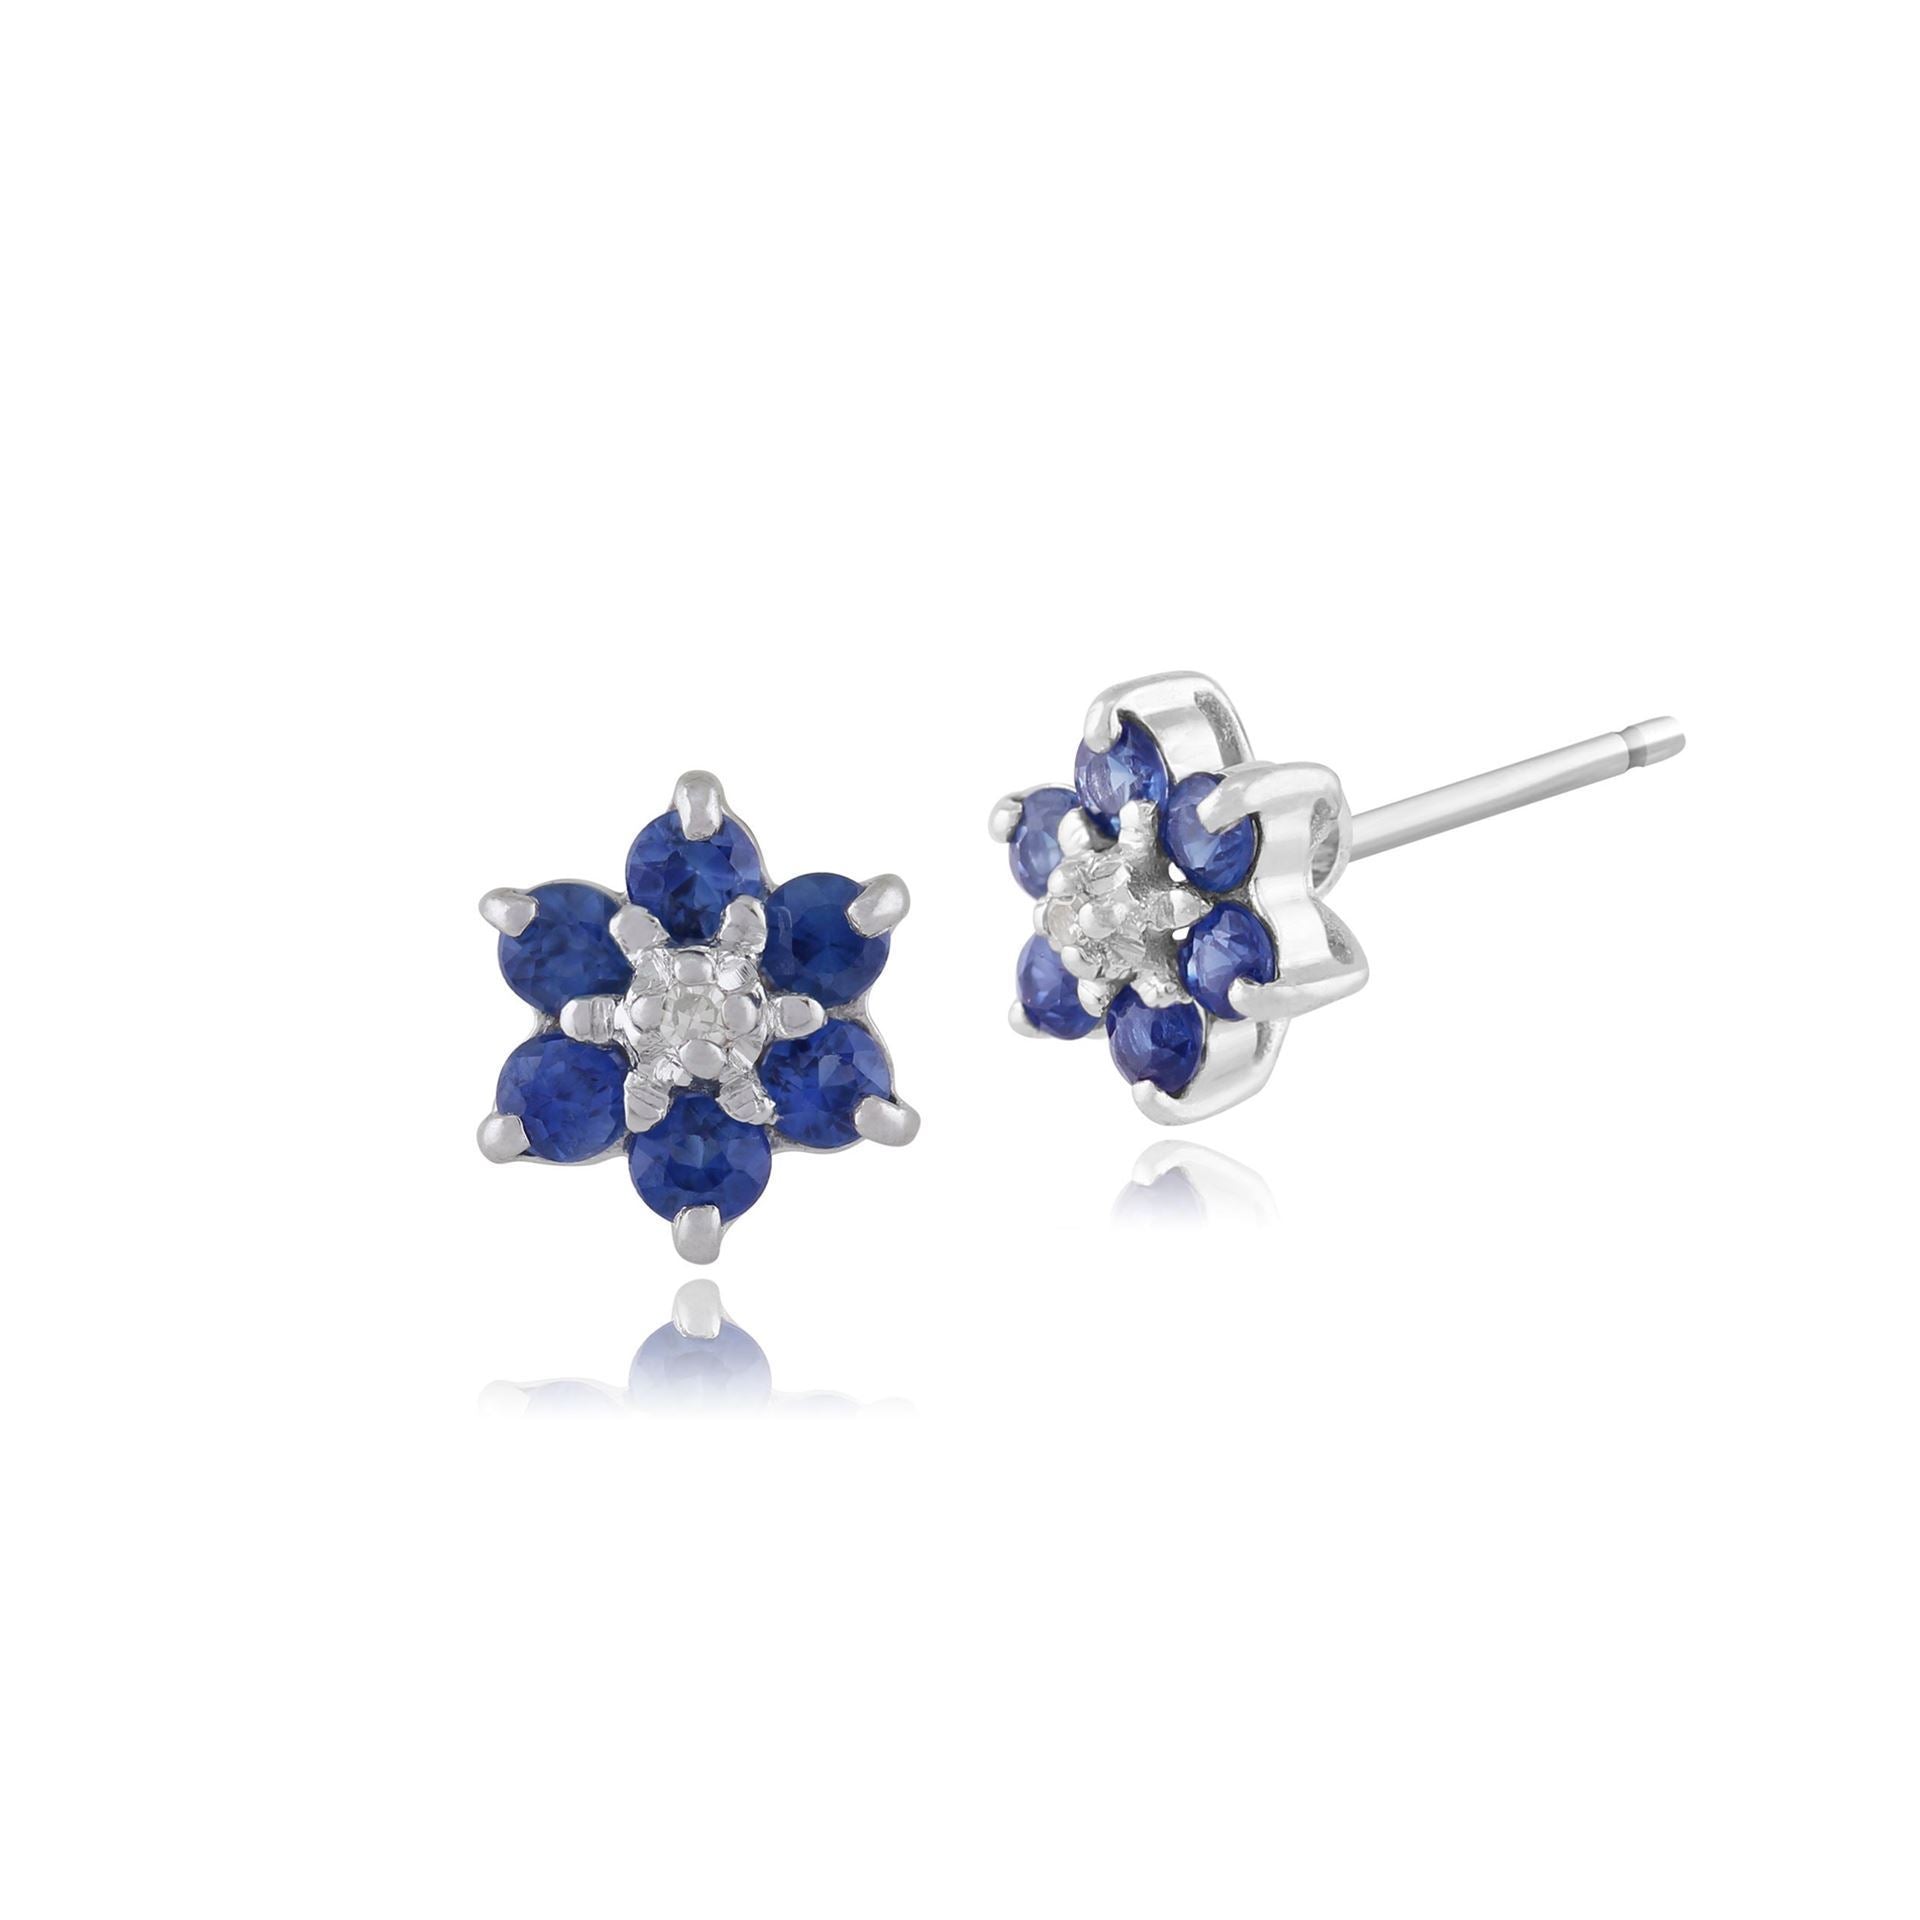 Floral Round Light Sapphire & Diamond Cluster Stud Earrings in 9ct White Gold